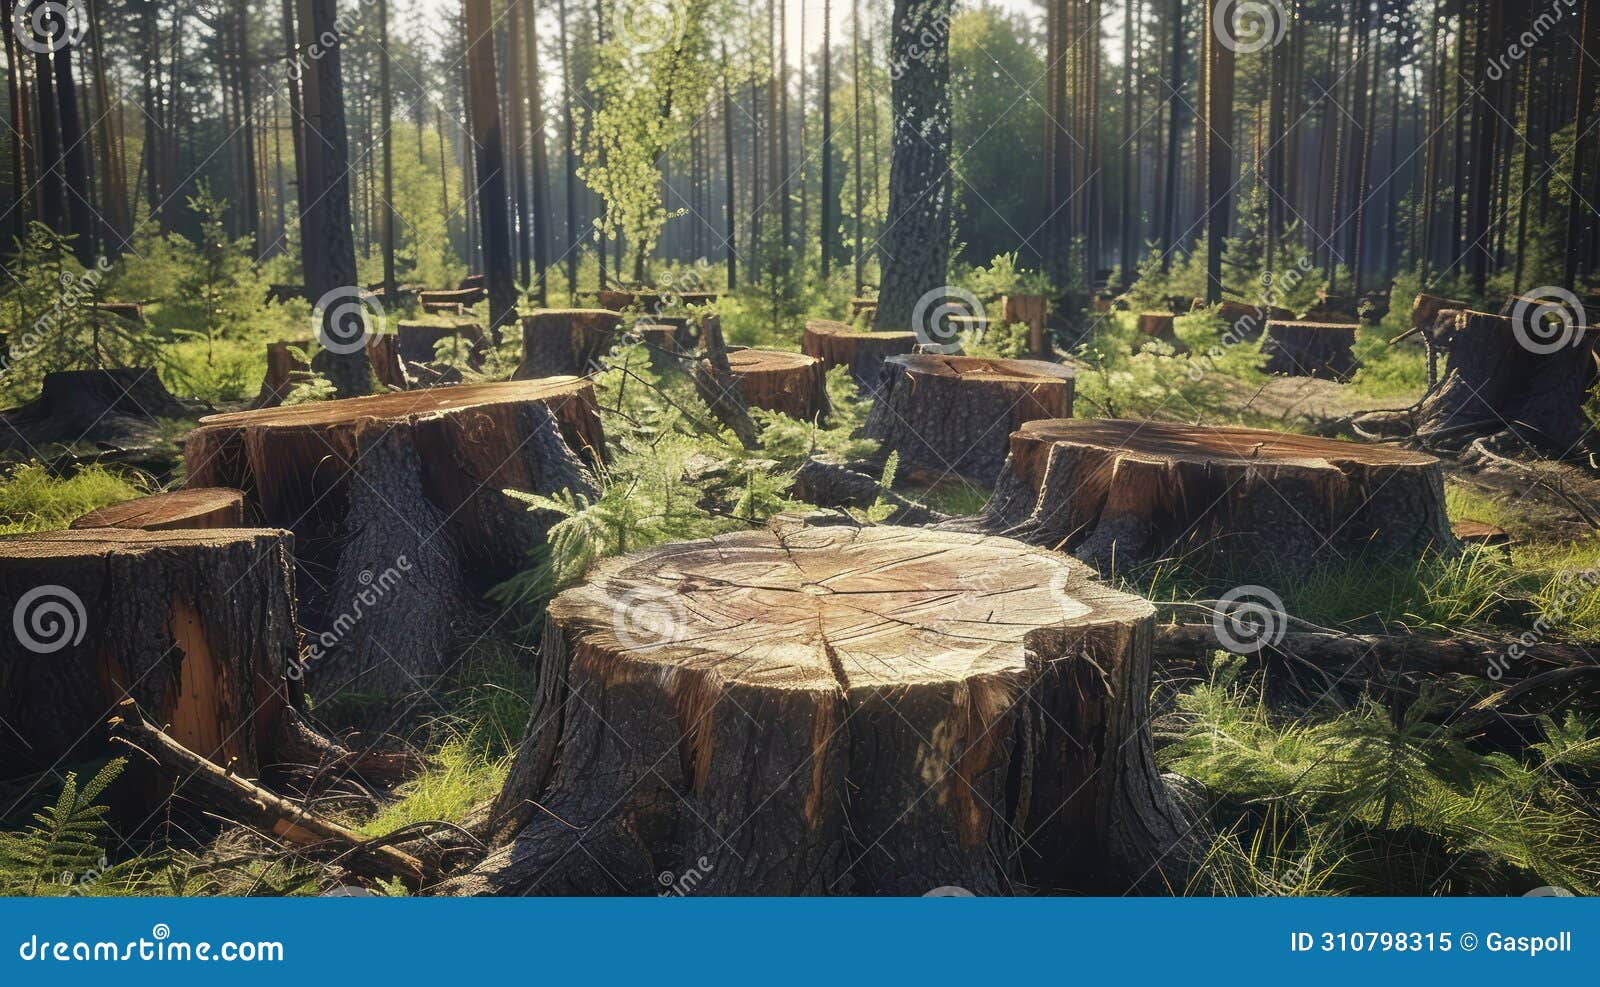 the lingering tree stumps in a summer forest as silent testaments to environmental decline